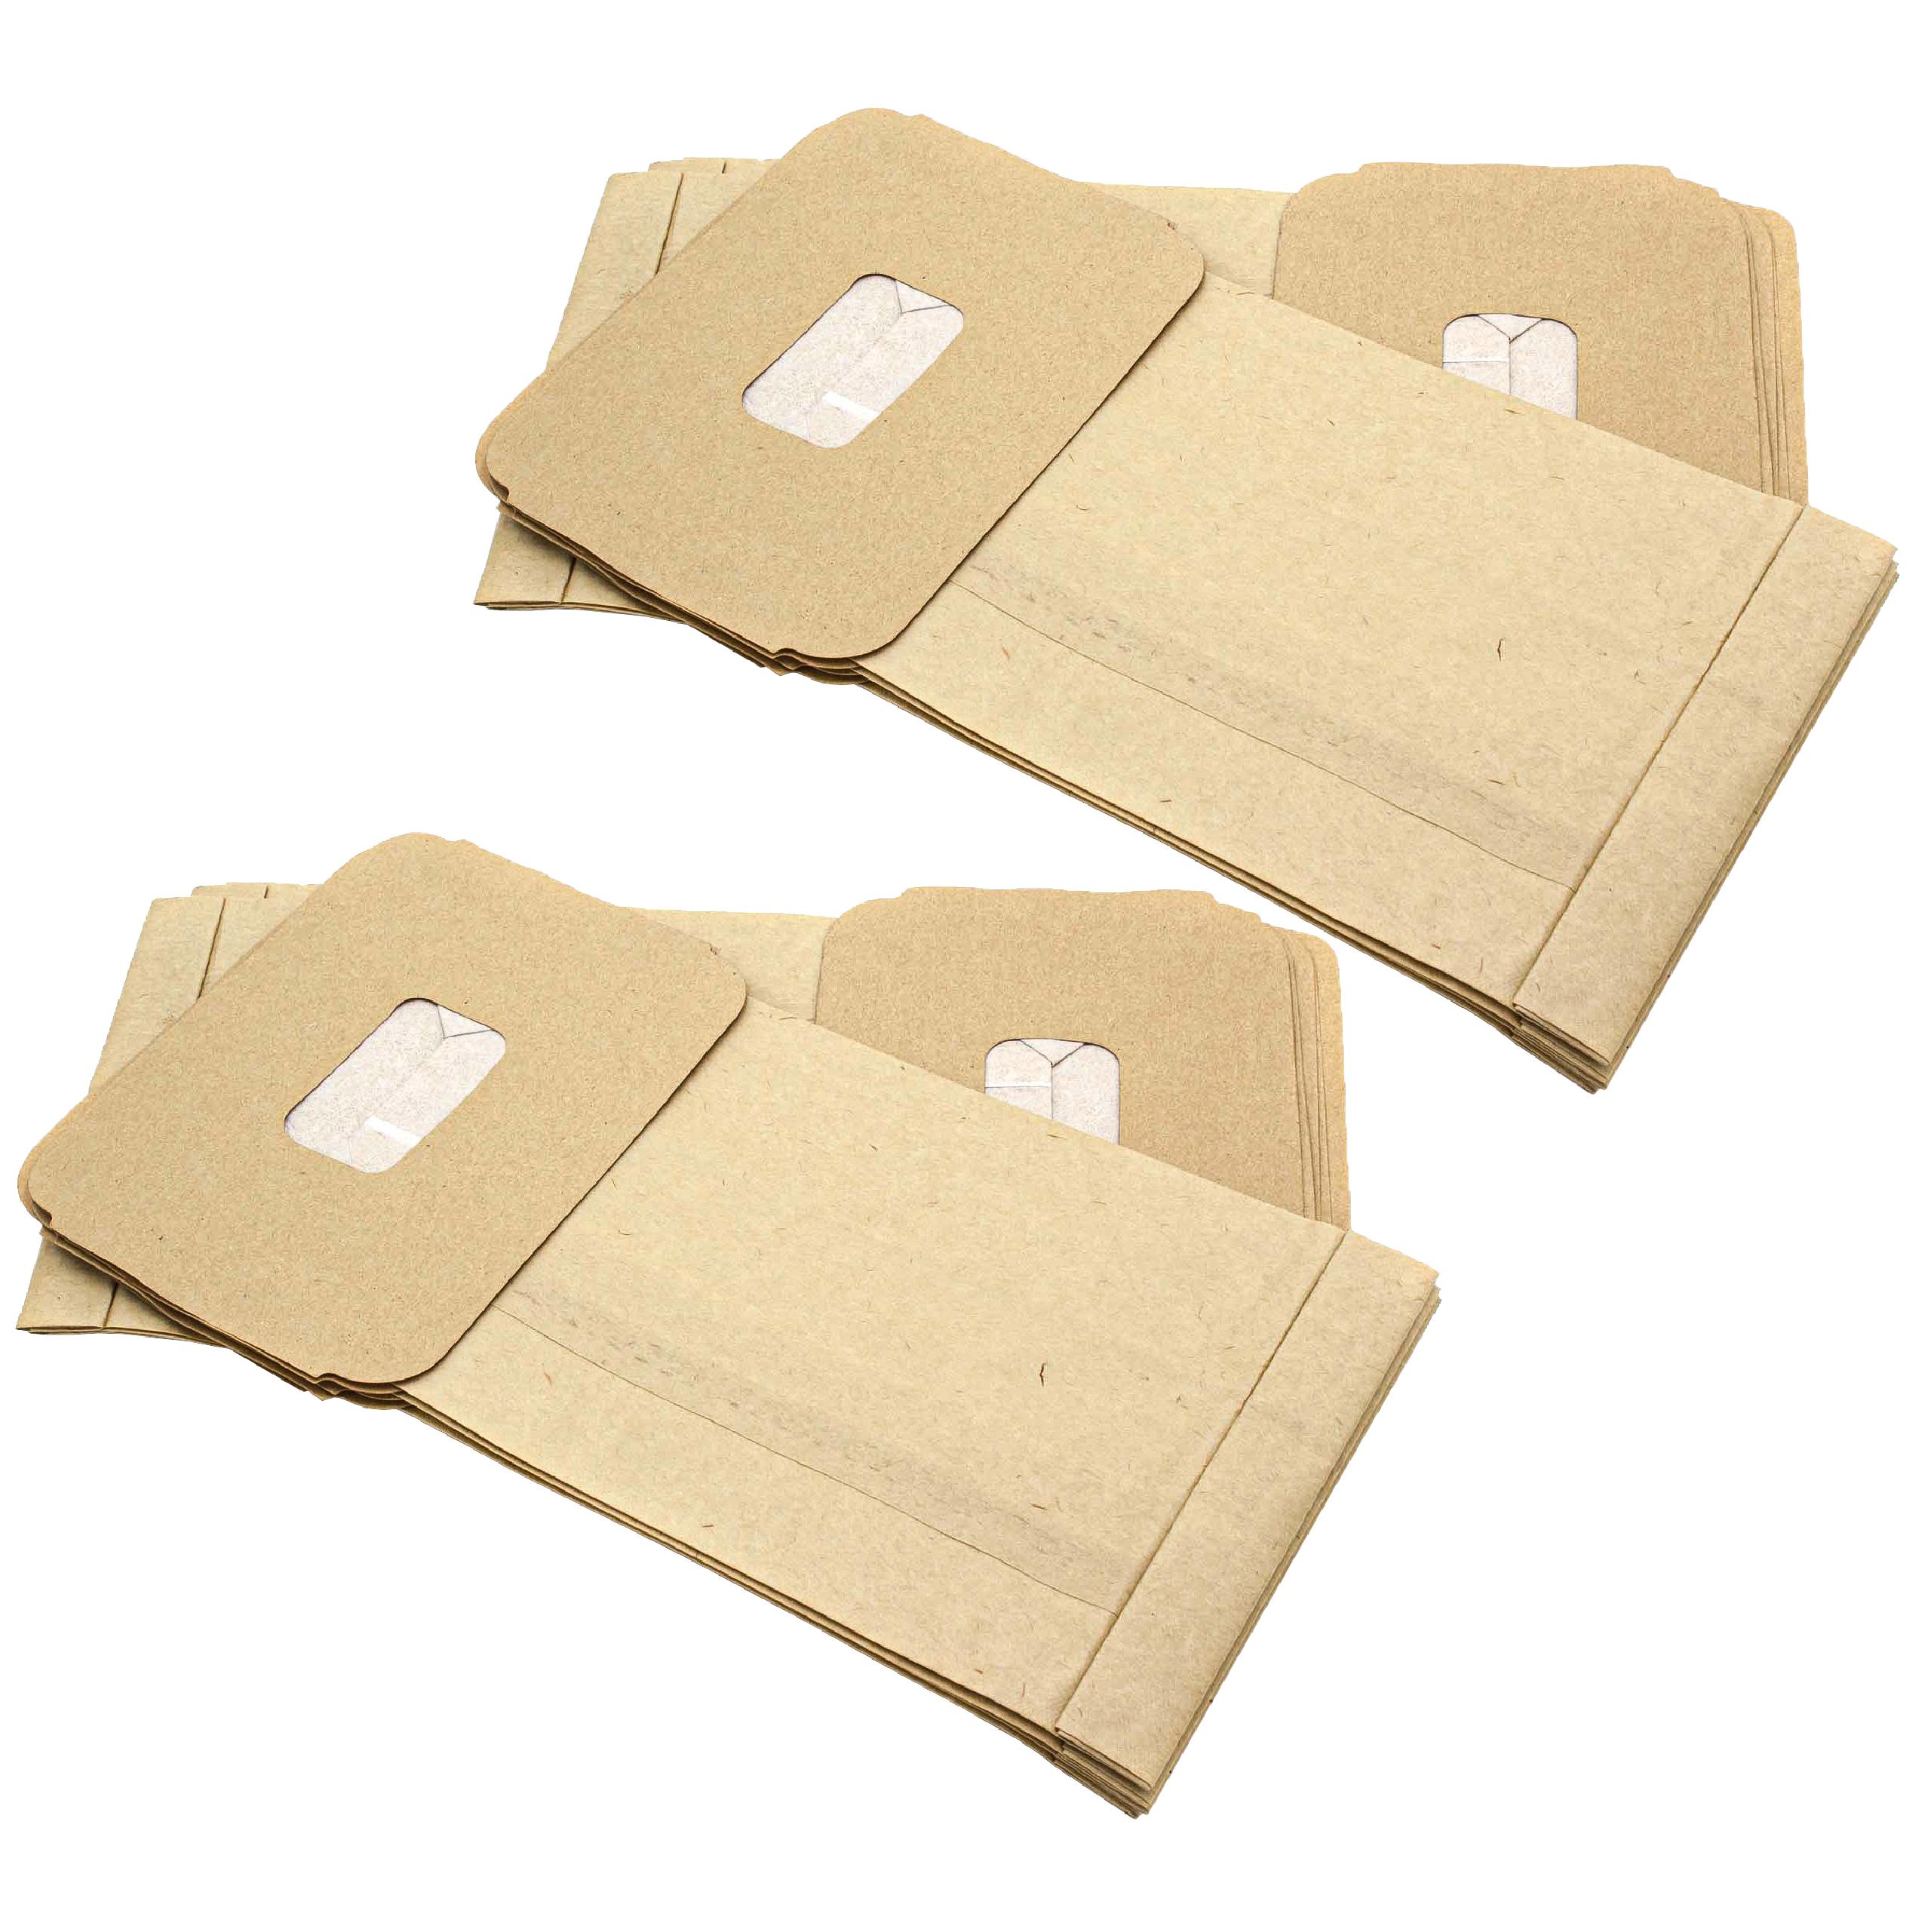 20x Vacuum Cleaner Bag replaces Europlus PH 1201 for Philips - paper